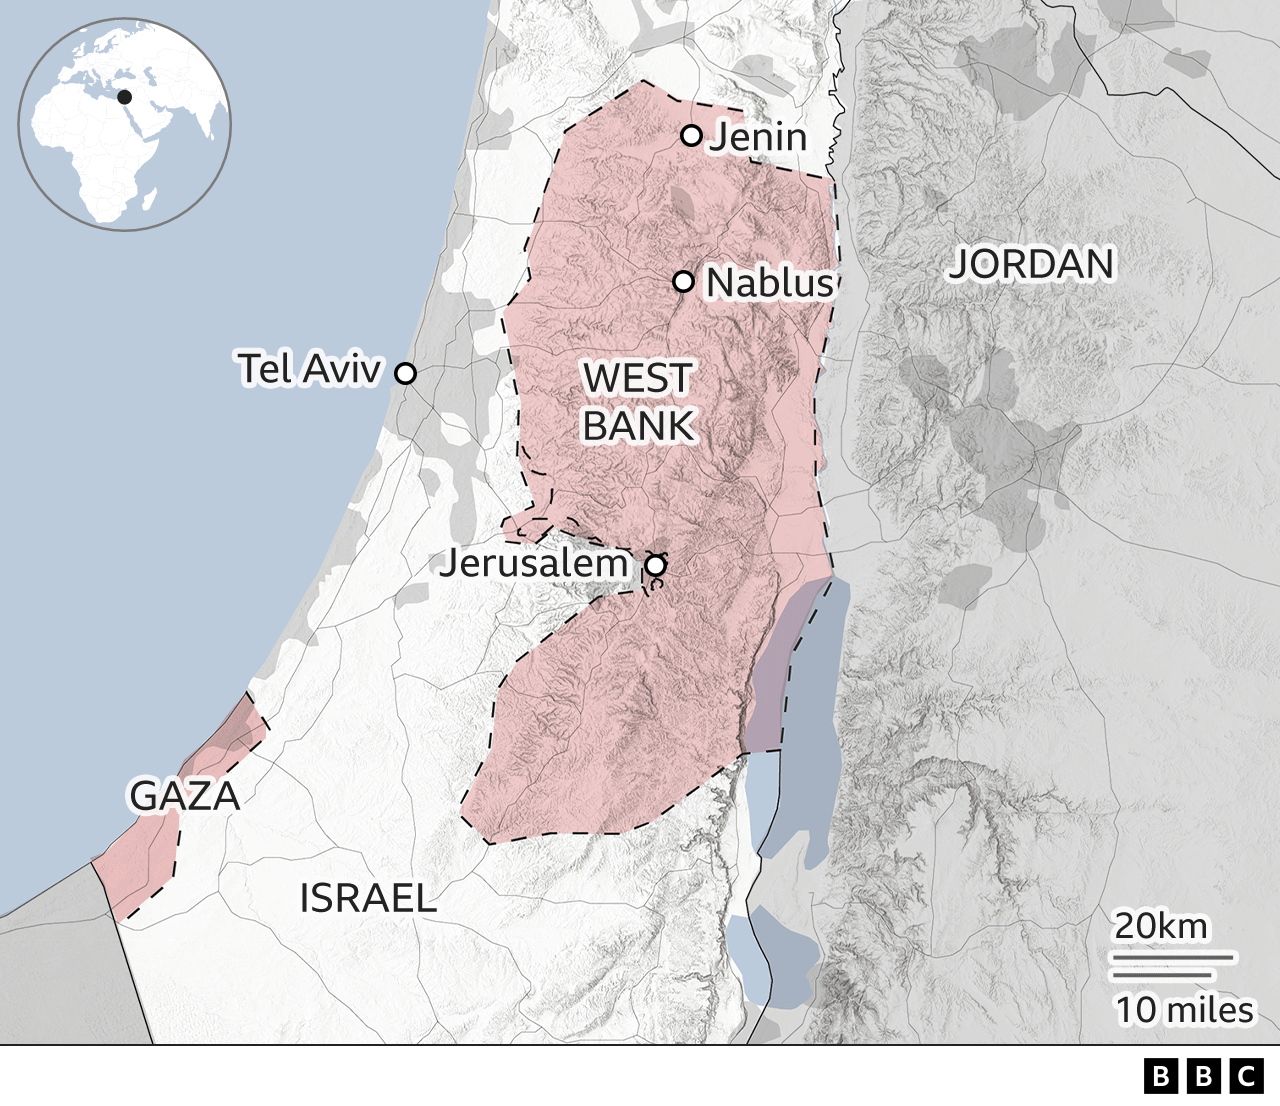 A map illustration showing the wider region of Israel, the occupied West Bank, Gaza, Tel Aviv and Jordan. Gaza and the occupied West Bank are highlighted in red, and show the locations of Jenin, Jerusalem and Nablus.